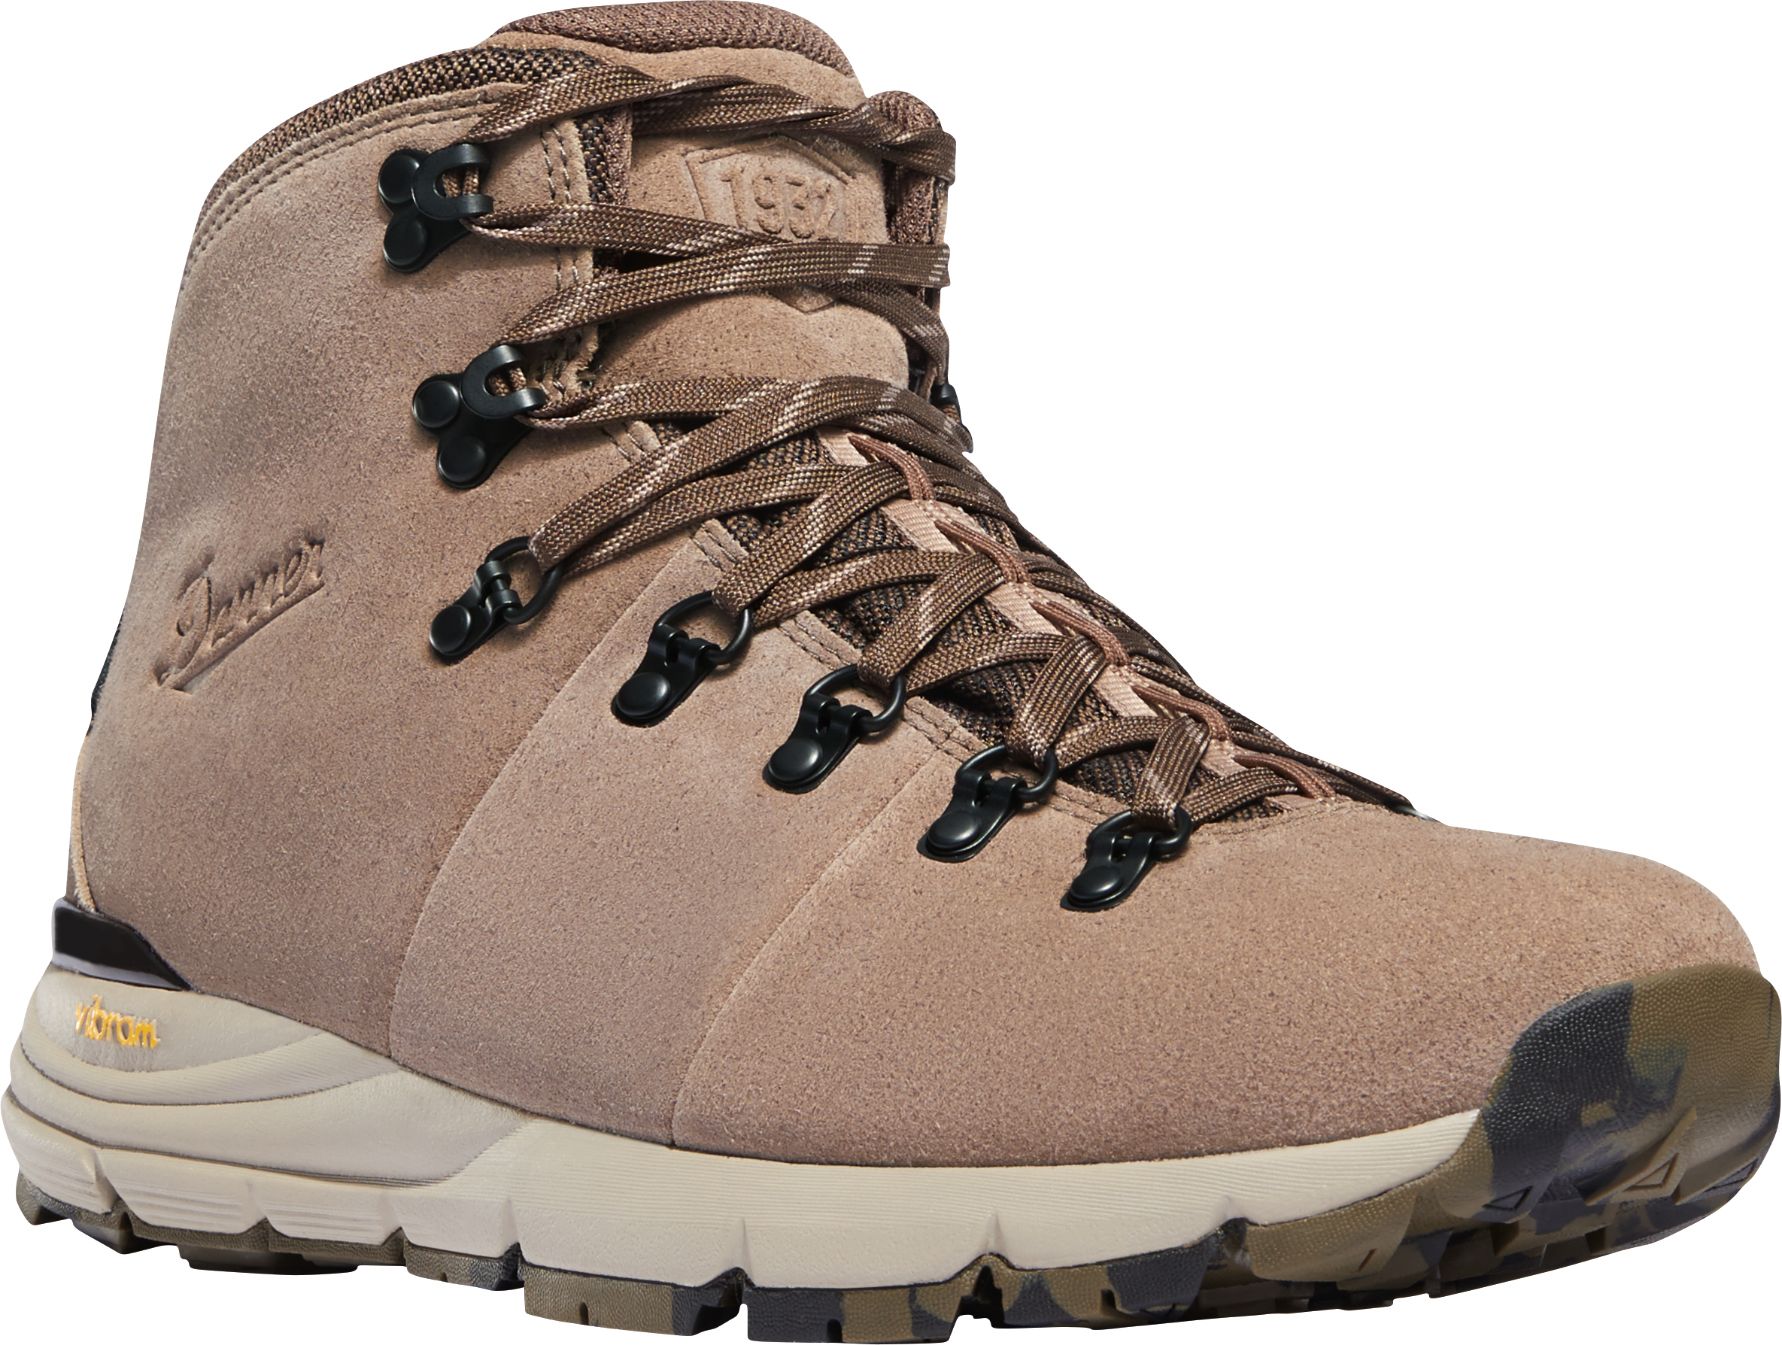 most waterproof hiking boots